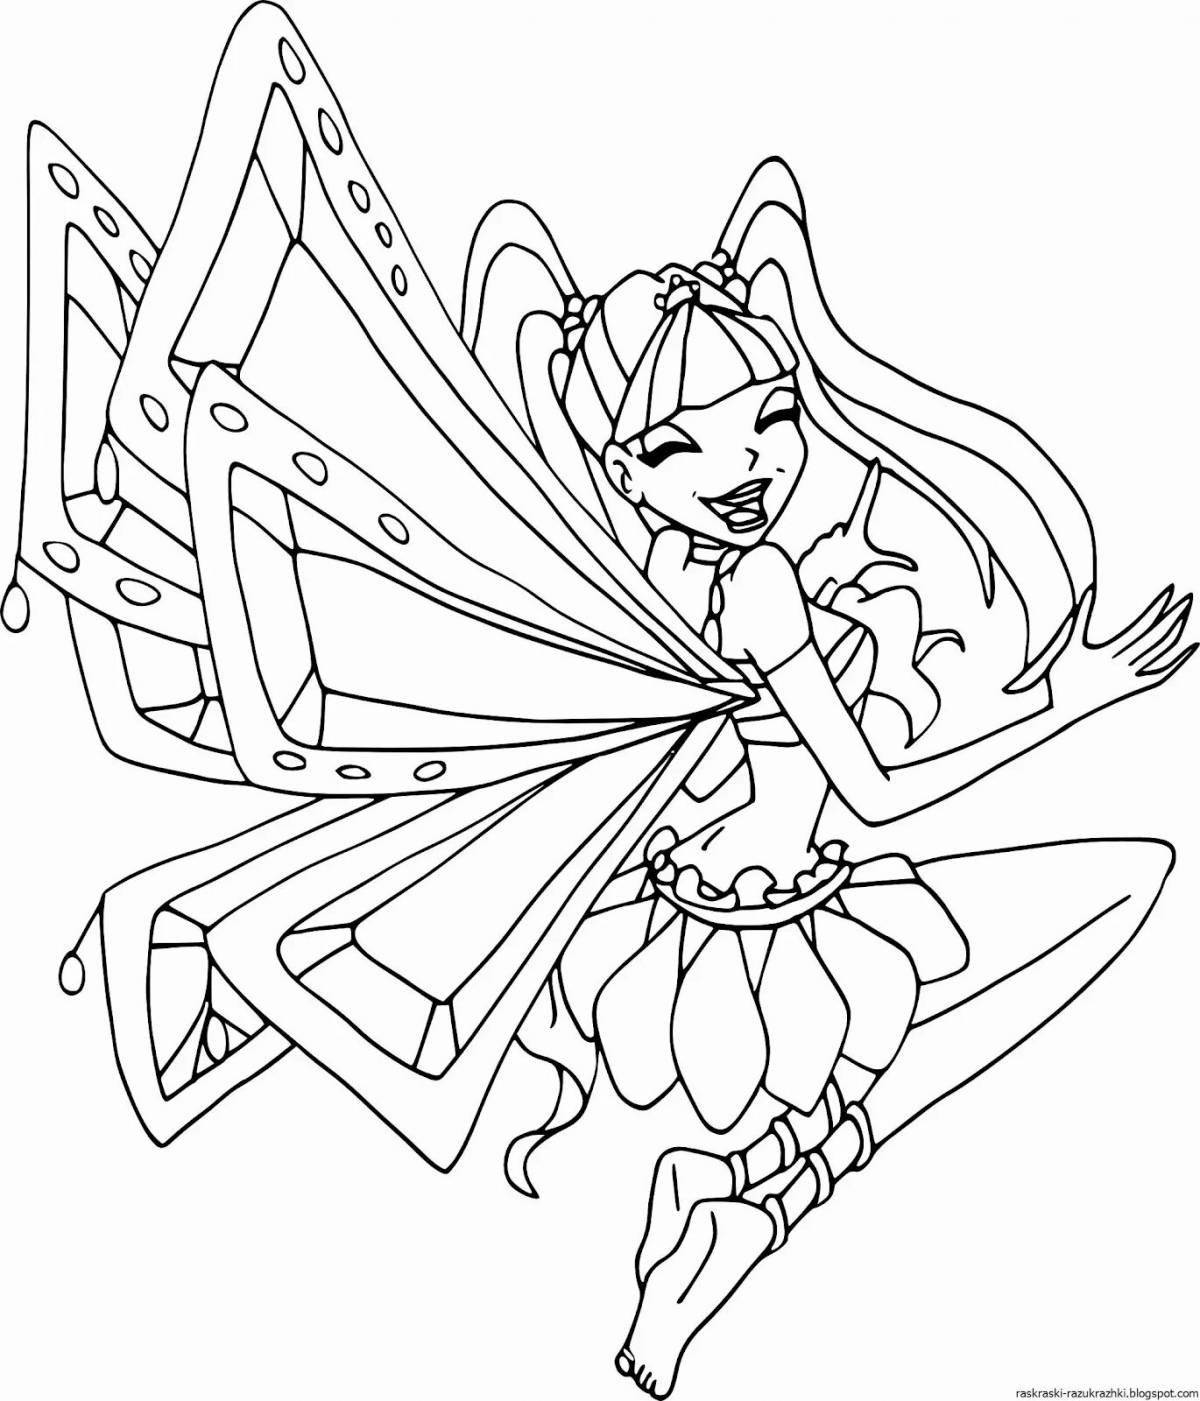 Incredible winx fairy coloring book for kids